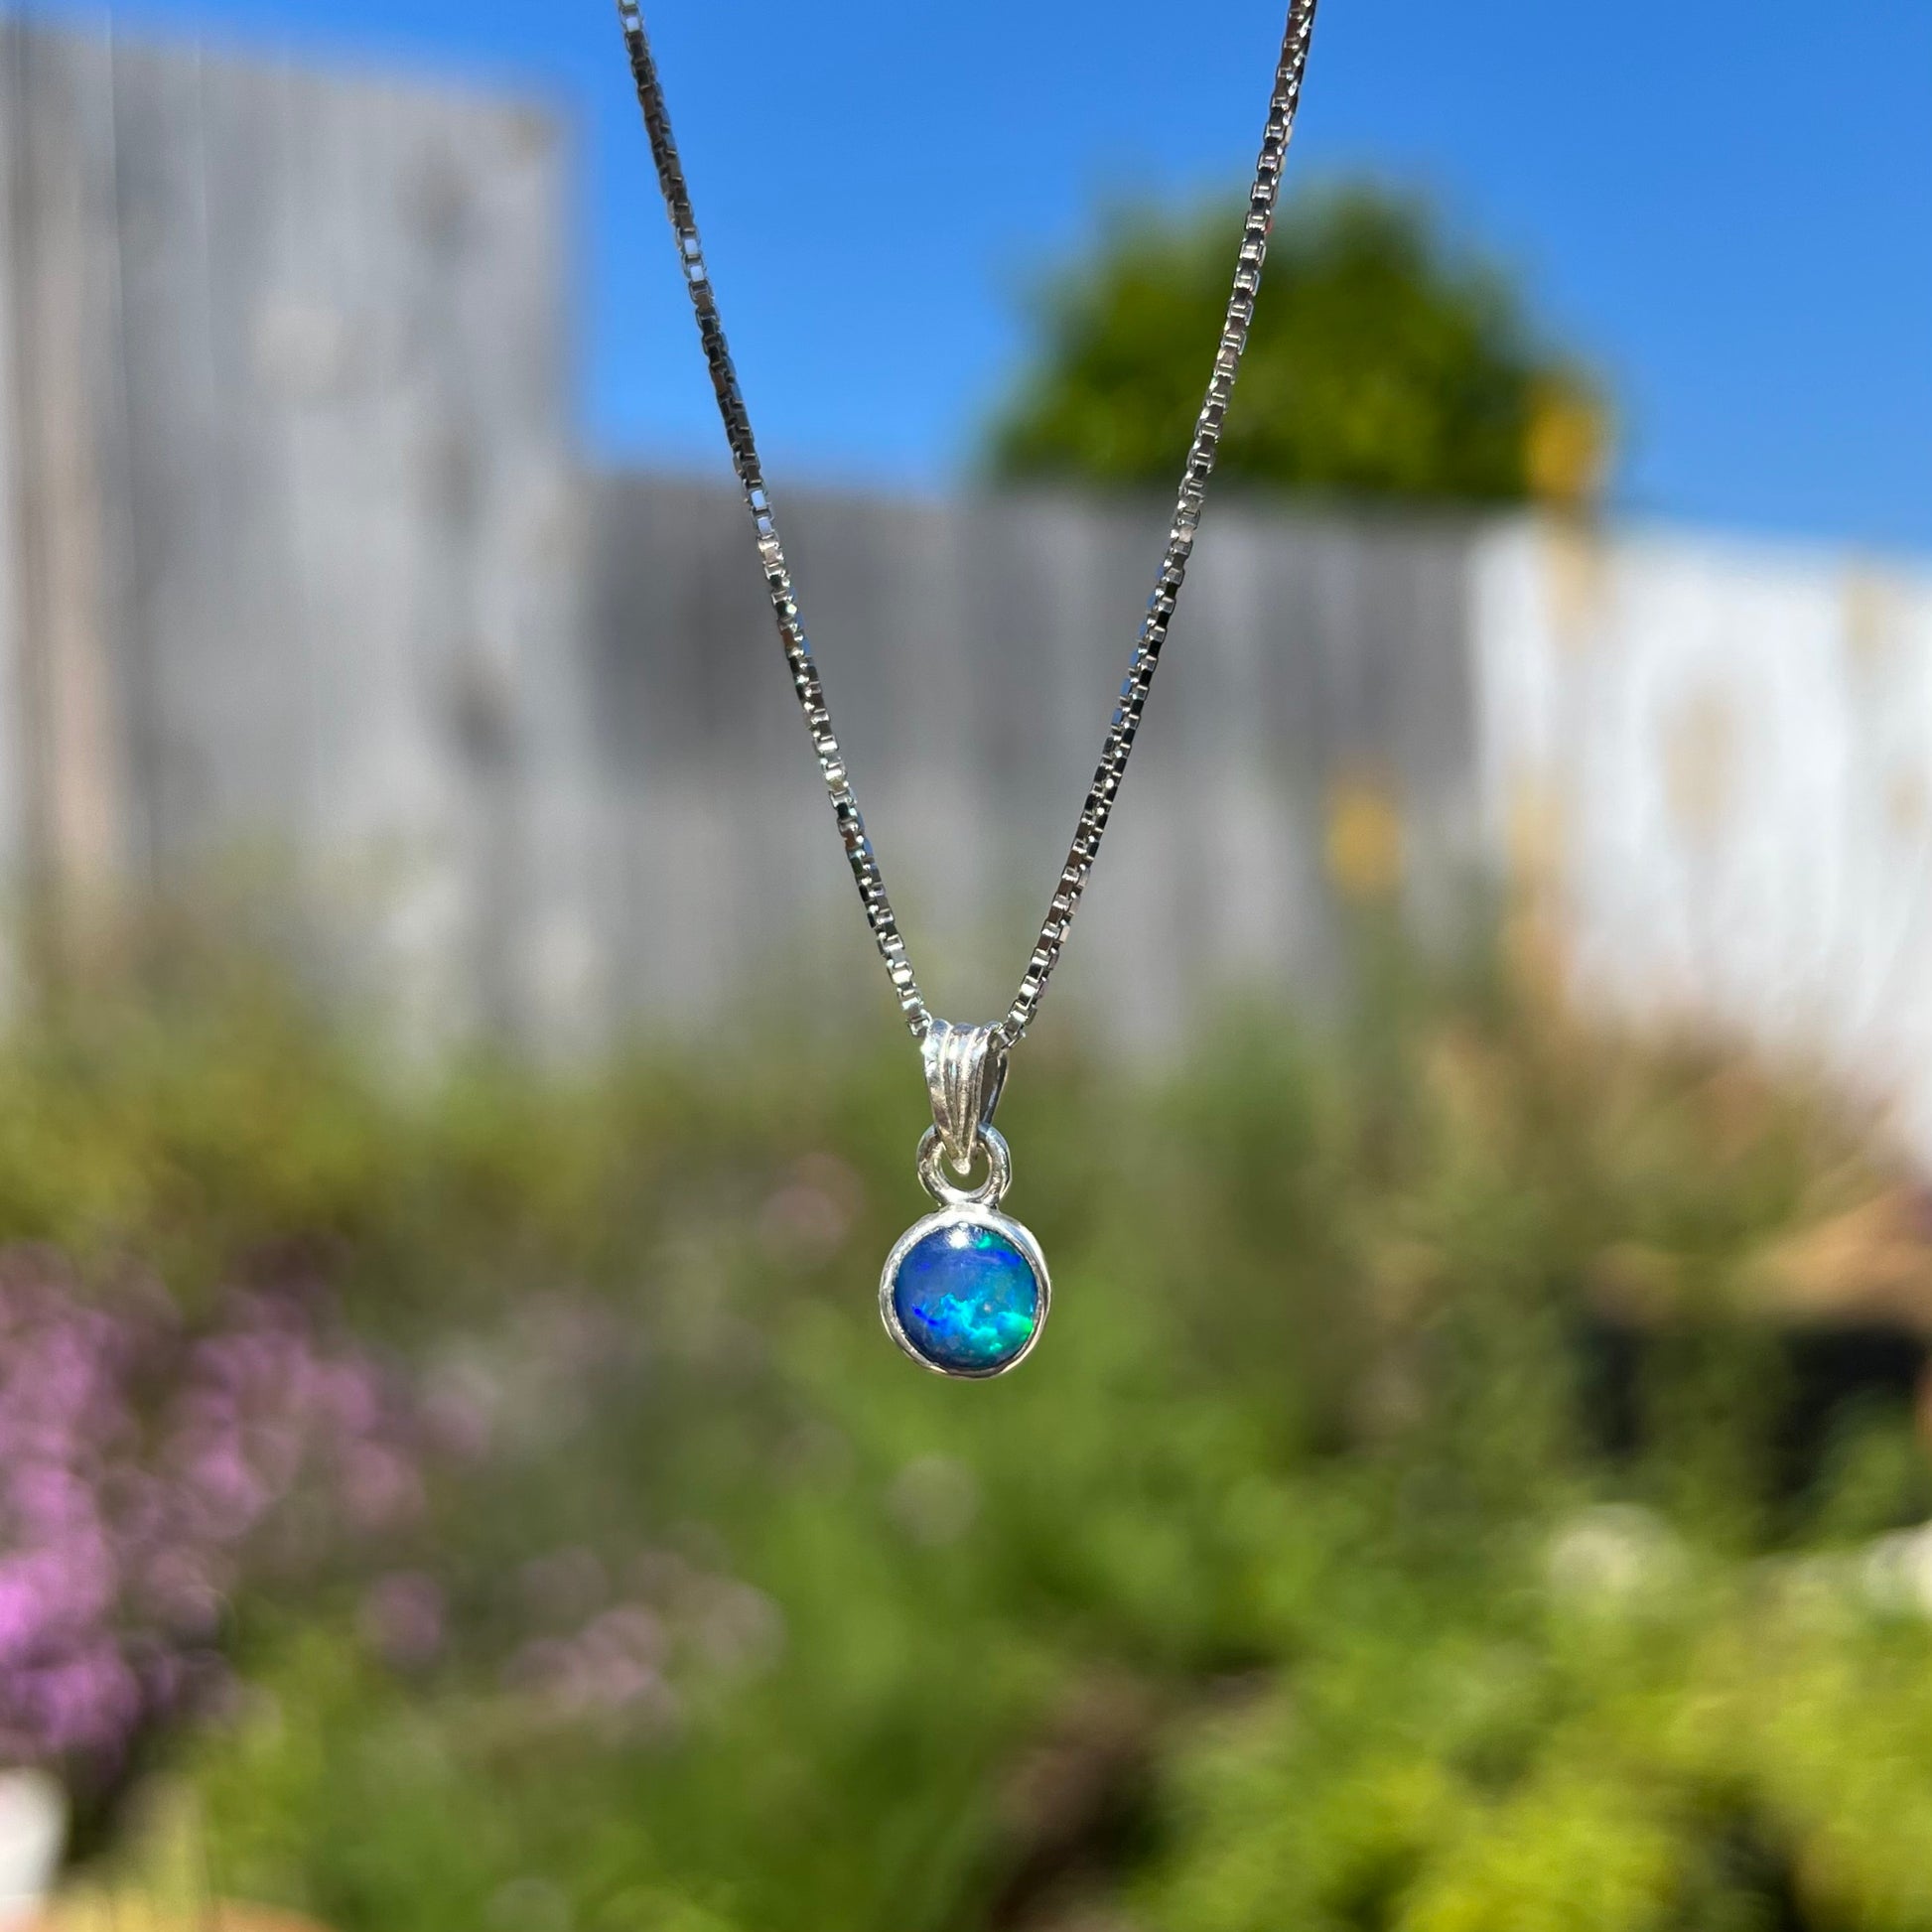 A sterling silver, round cabochon cut black opal solitaire necklace.  The opal has green and blue fire.